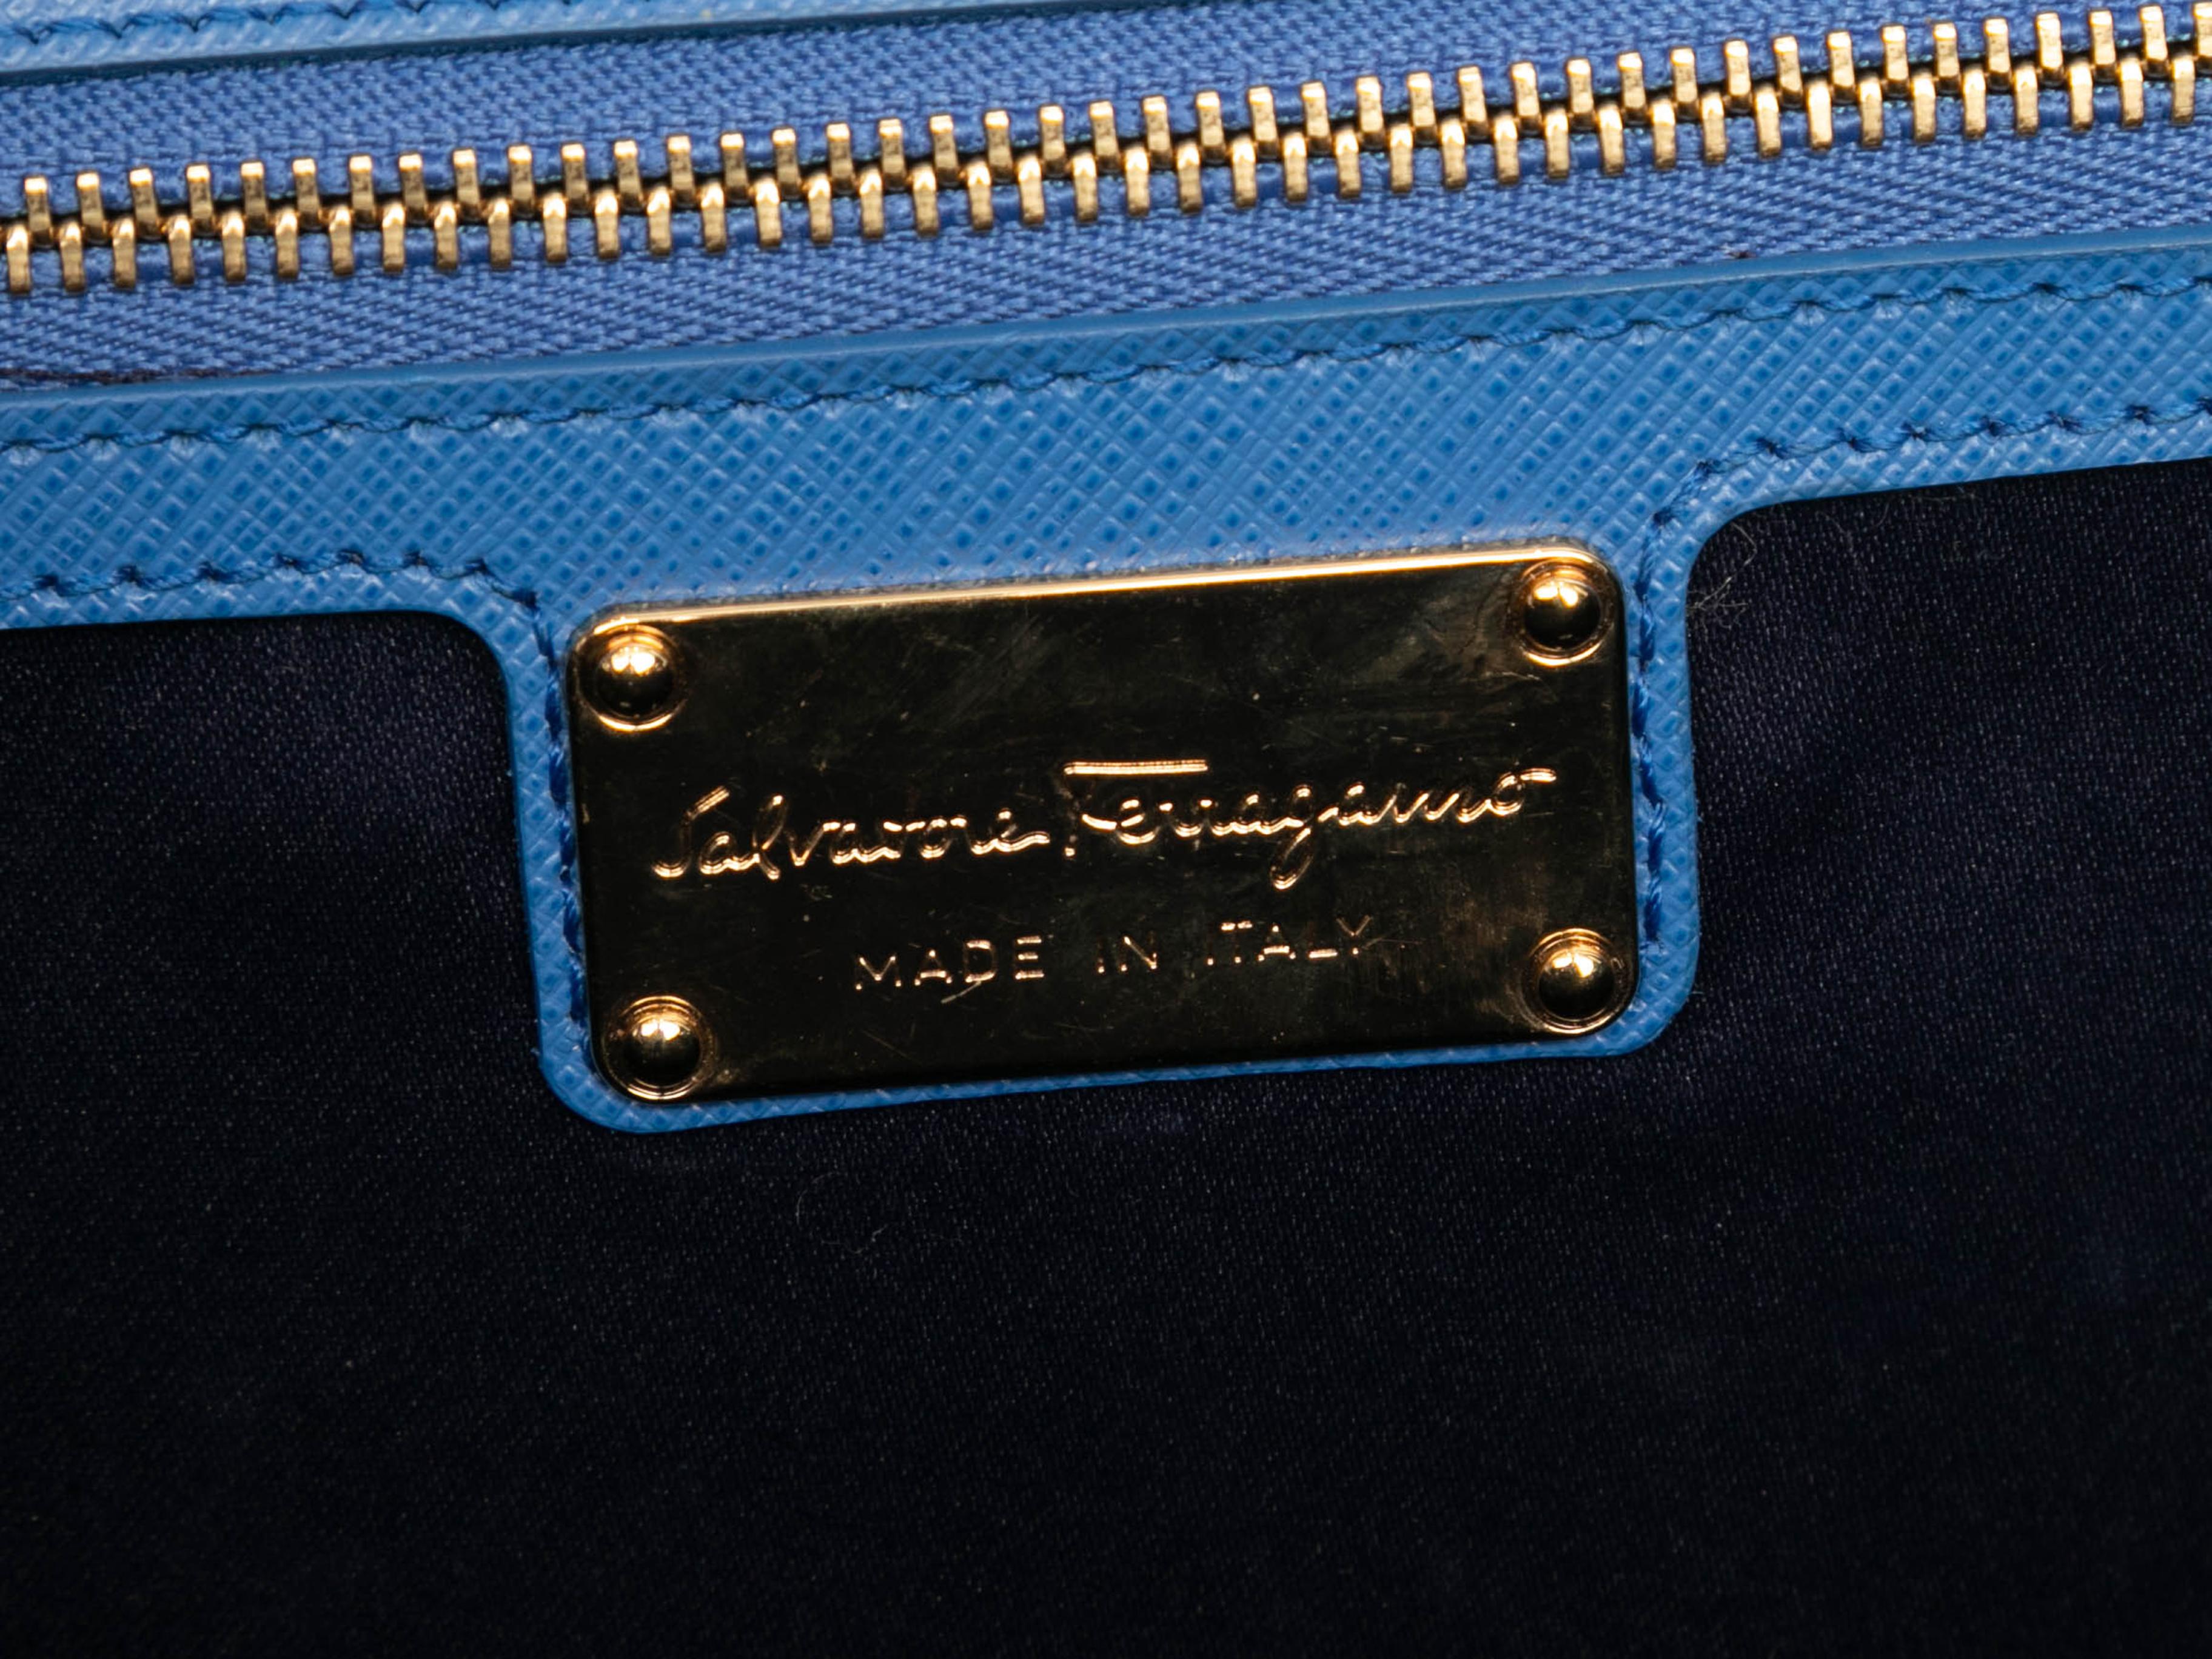 Blue Salvatore Ferragamo Vara Bow Bag. The Vara bag features a leather body, gold-tone hardware, a single chain-link and leather strap, and a front flap closure. 10